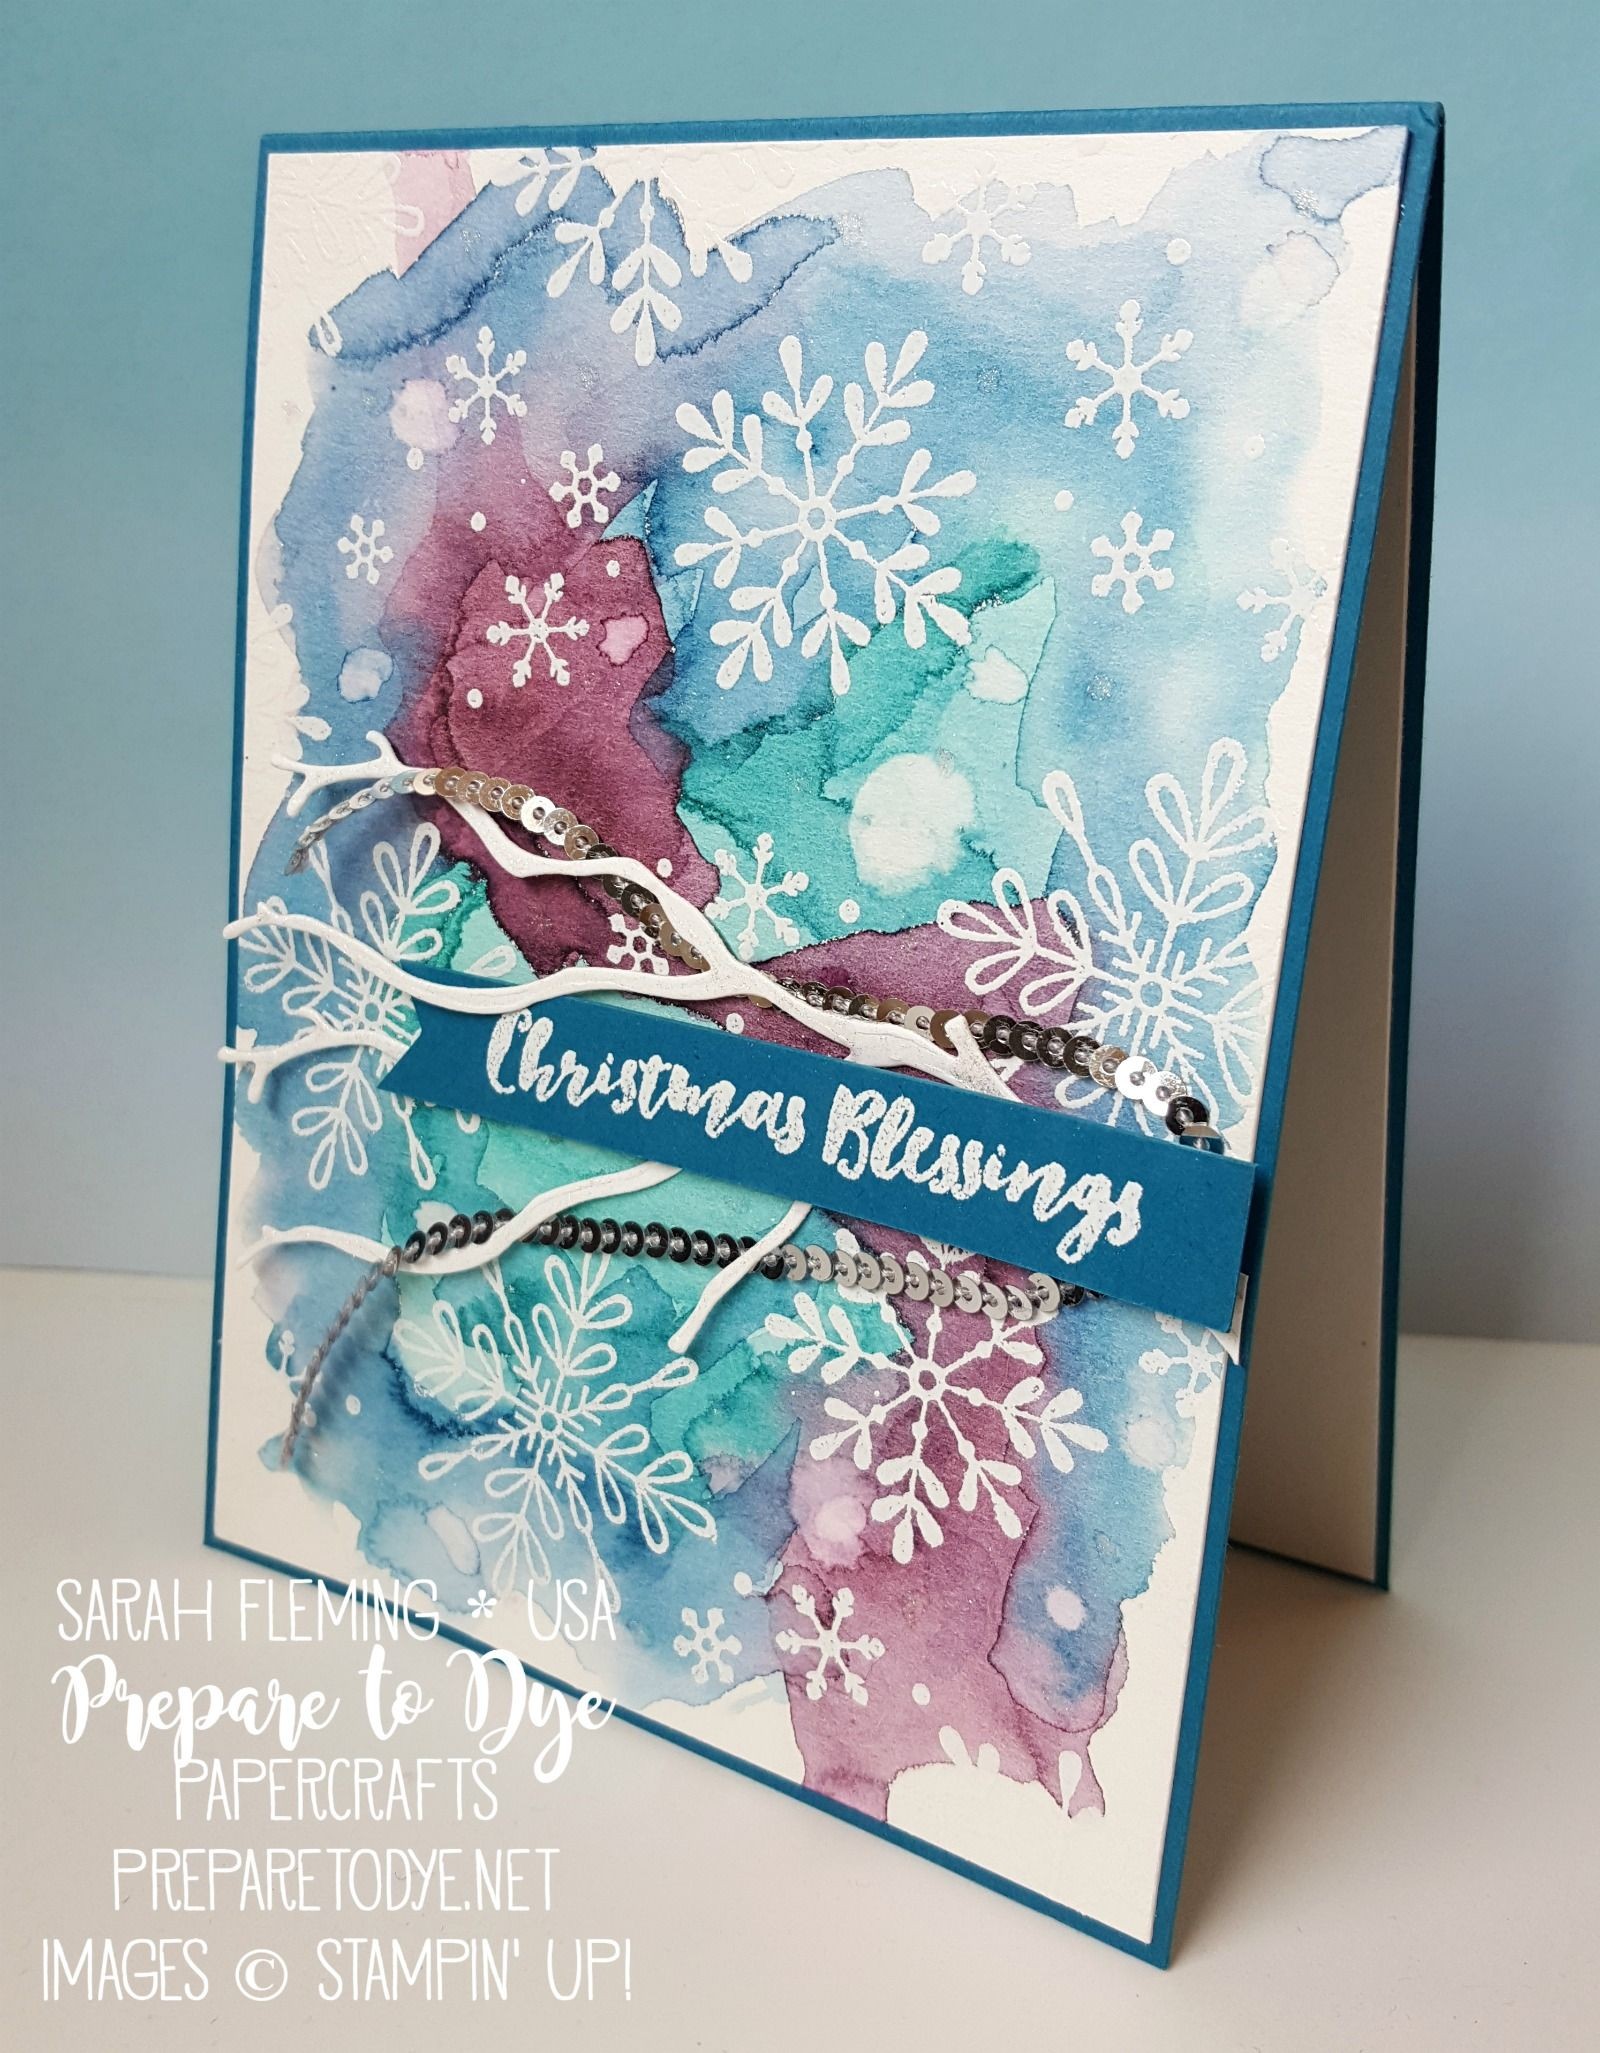 Papercraft Christmas Cards Stampin Up Handmade Christmas Card with Watercolor Background